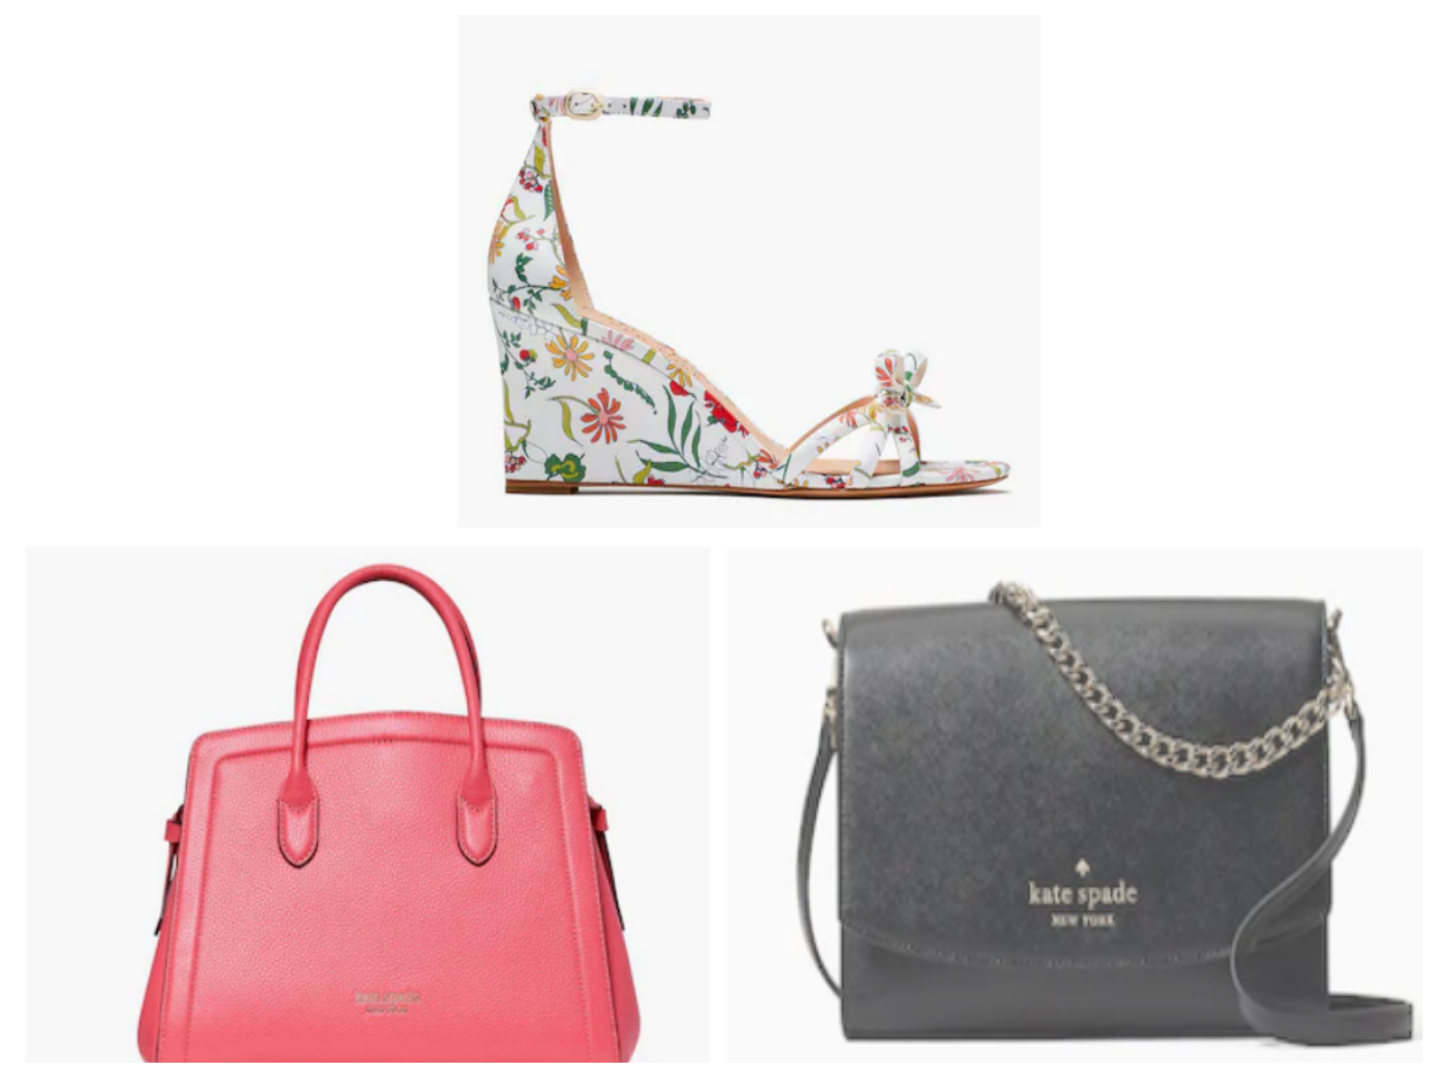 Kate Spade designer sale, get up to 50% off purses, wallets and more -  